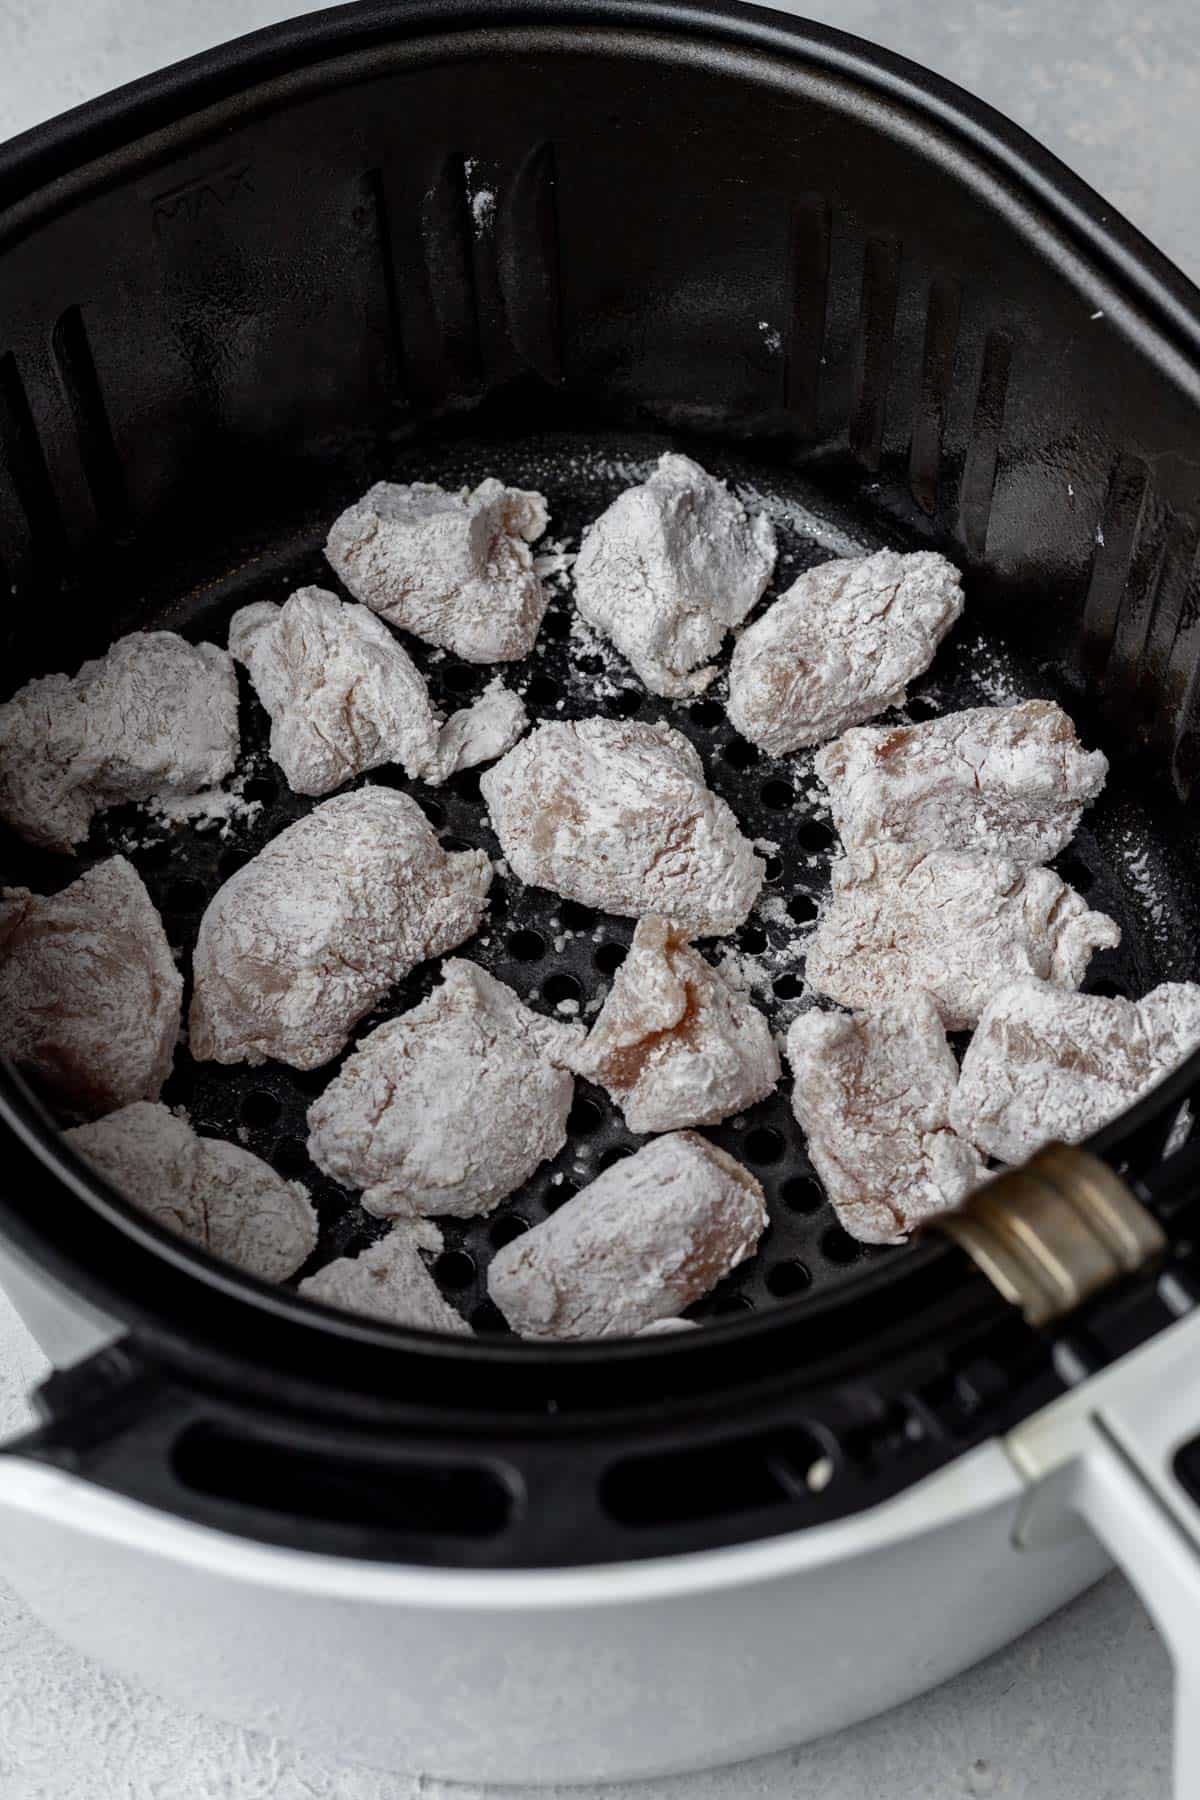 Cubed cornstarch-coated chicken in the basket of an air fryer.